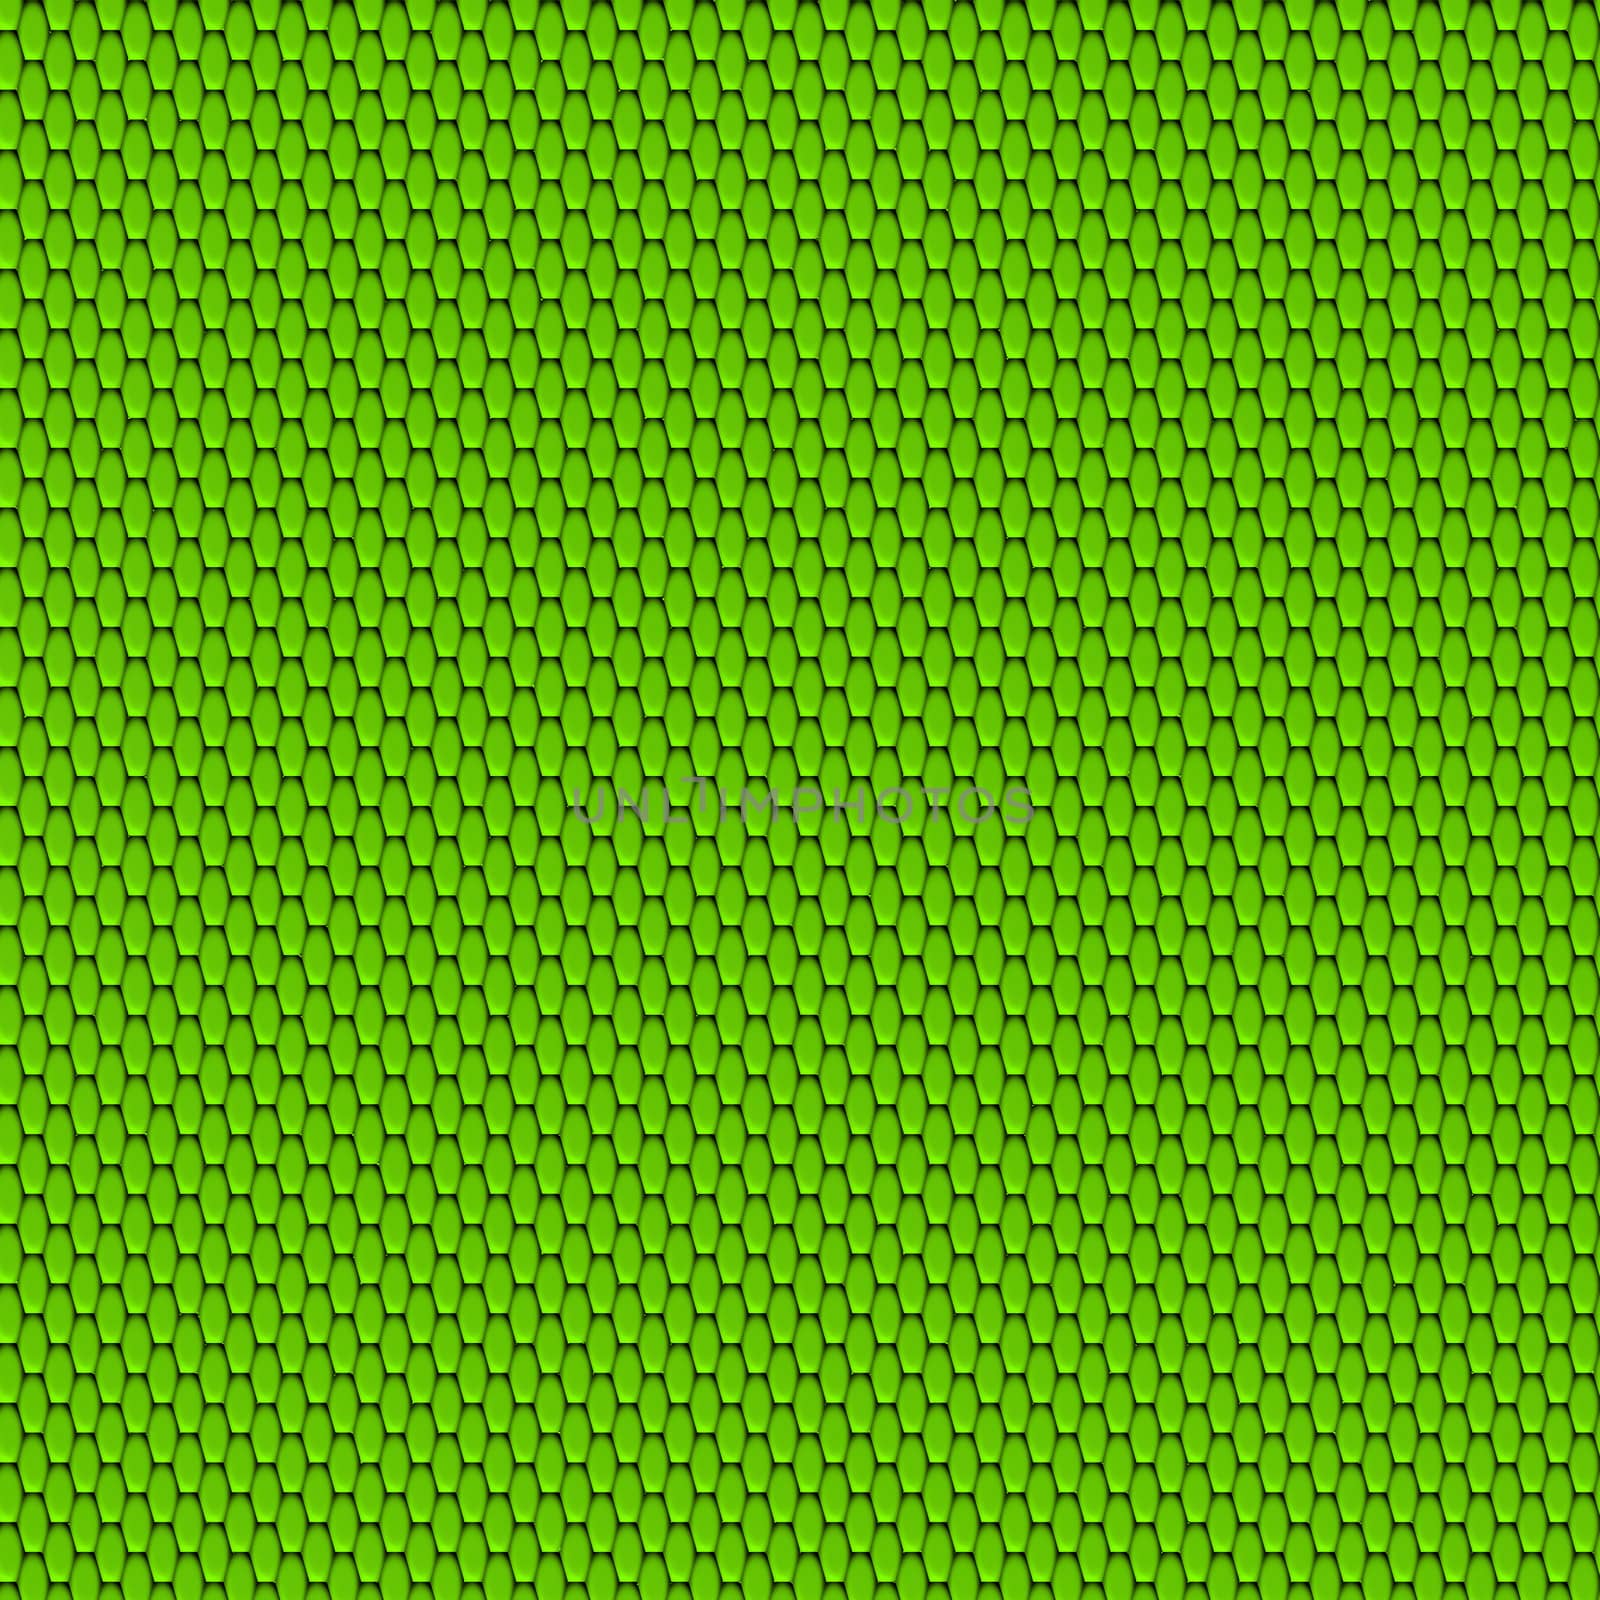 Abstract green seamless simple pattern - tiles by sfinks